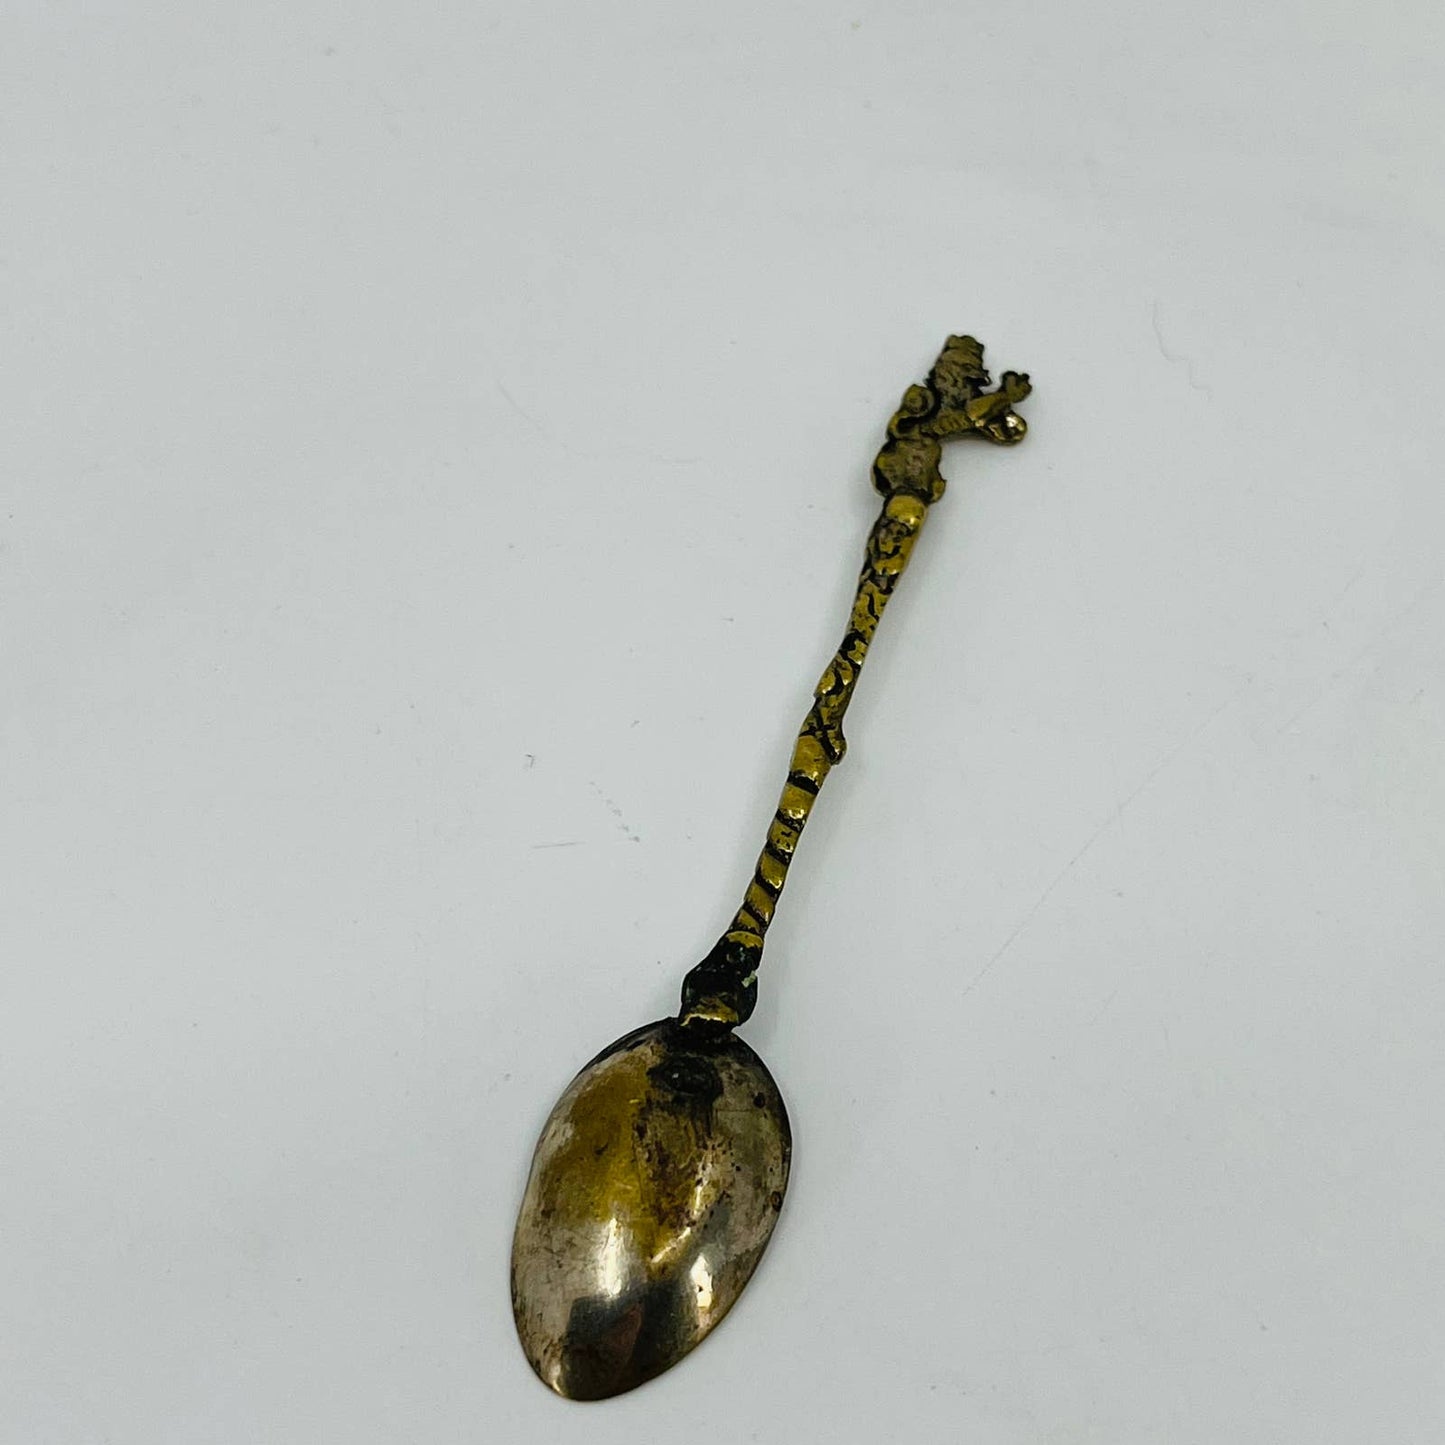 Vintage ITALY Collector Souvenir Spoon 4.25" Silver/Brass Winged Crown Lion SB7